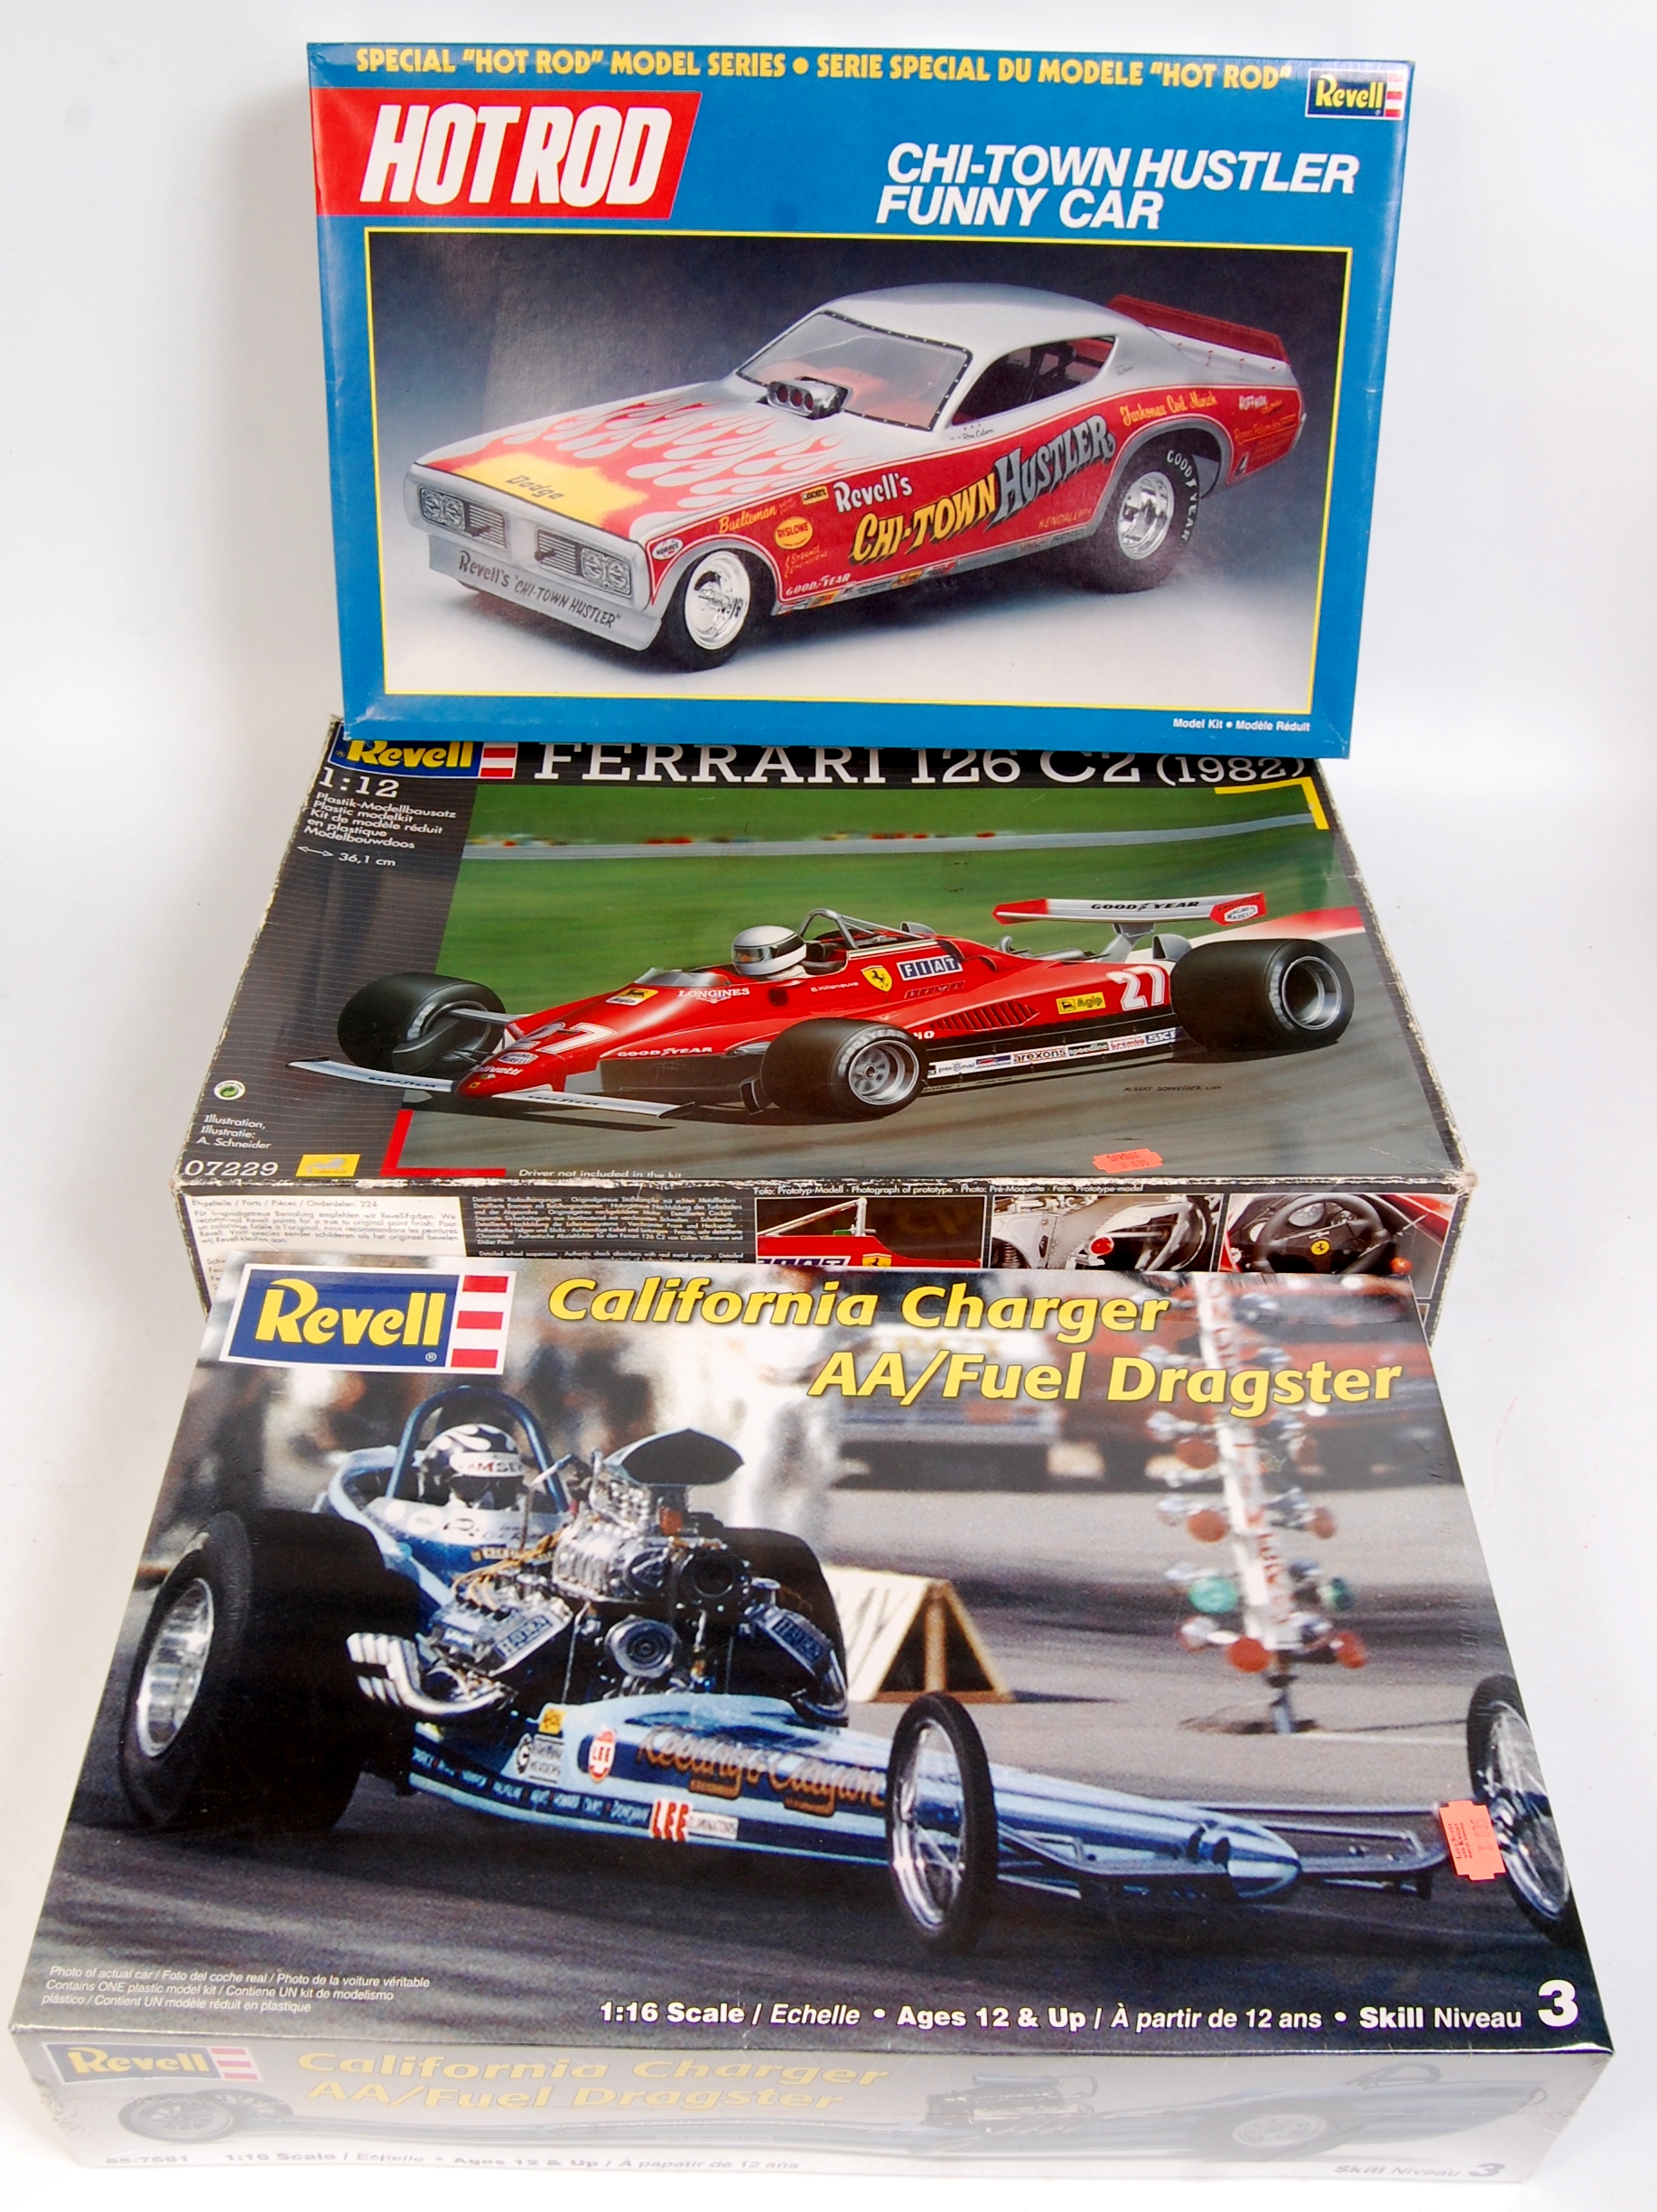 7 mixed scale Formula 1, Hot Rod, Dragster and other racing plastic kits,